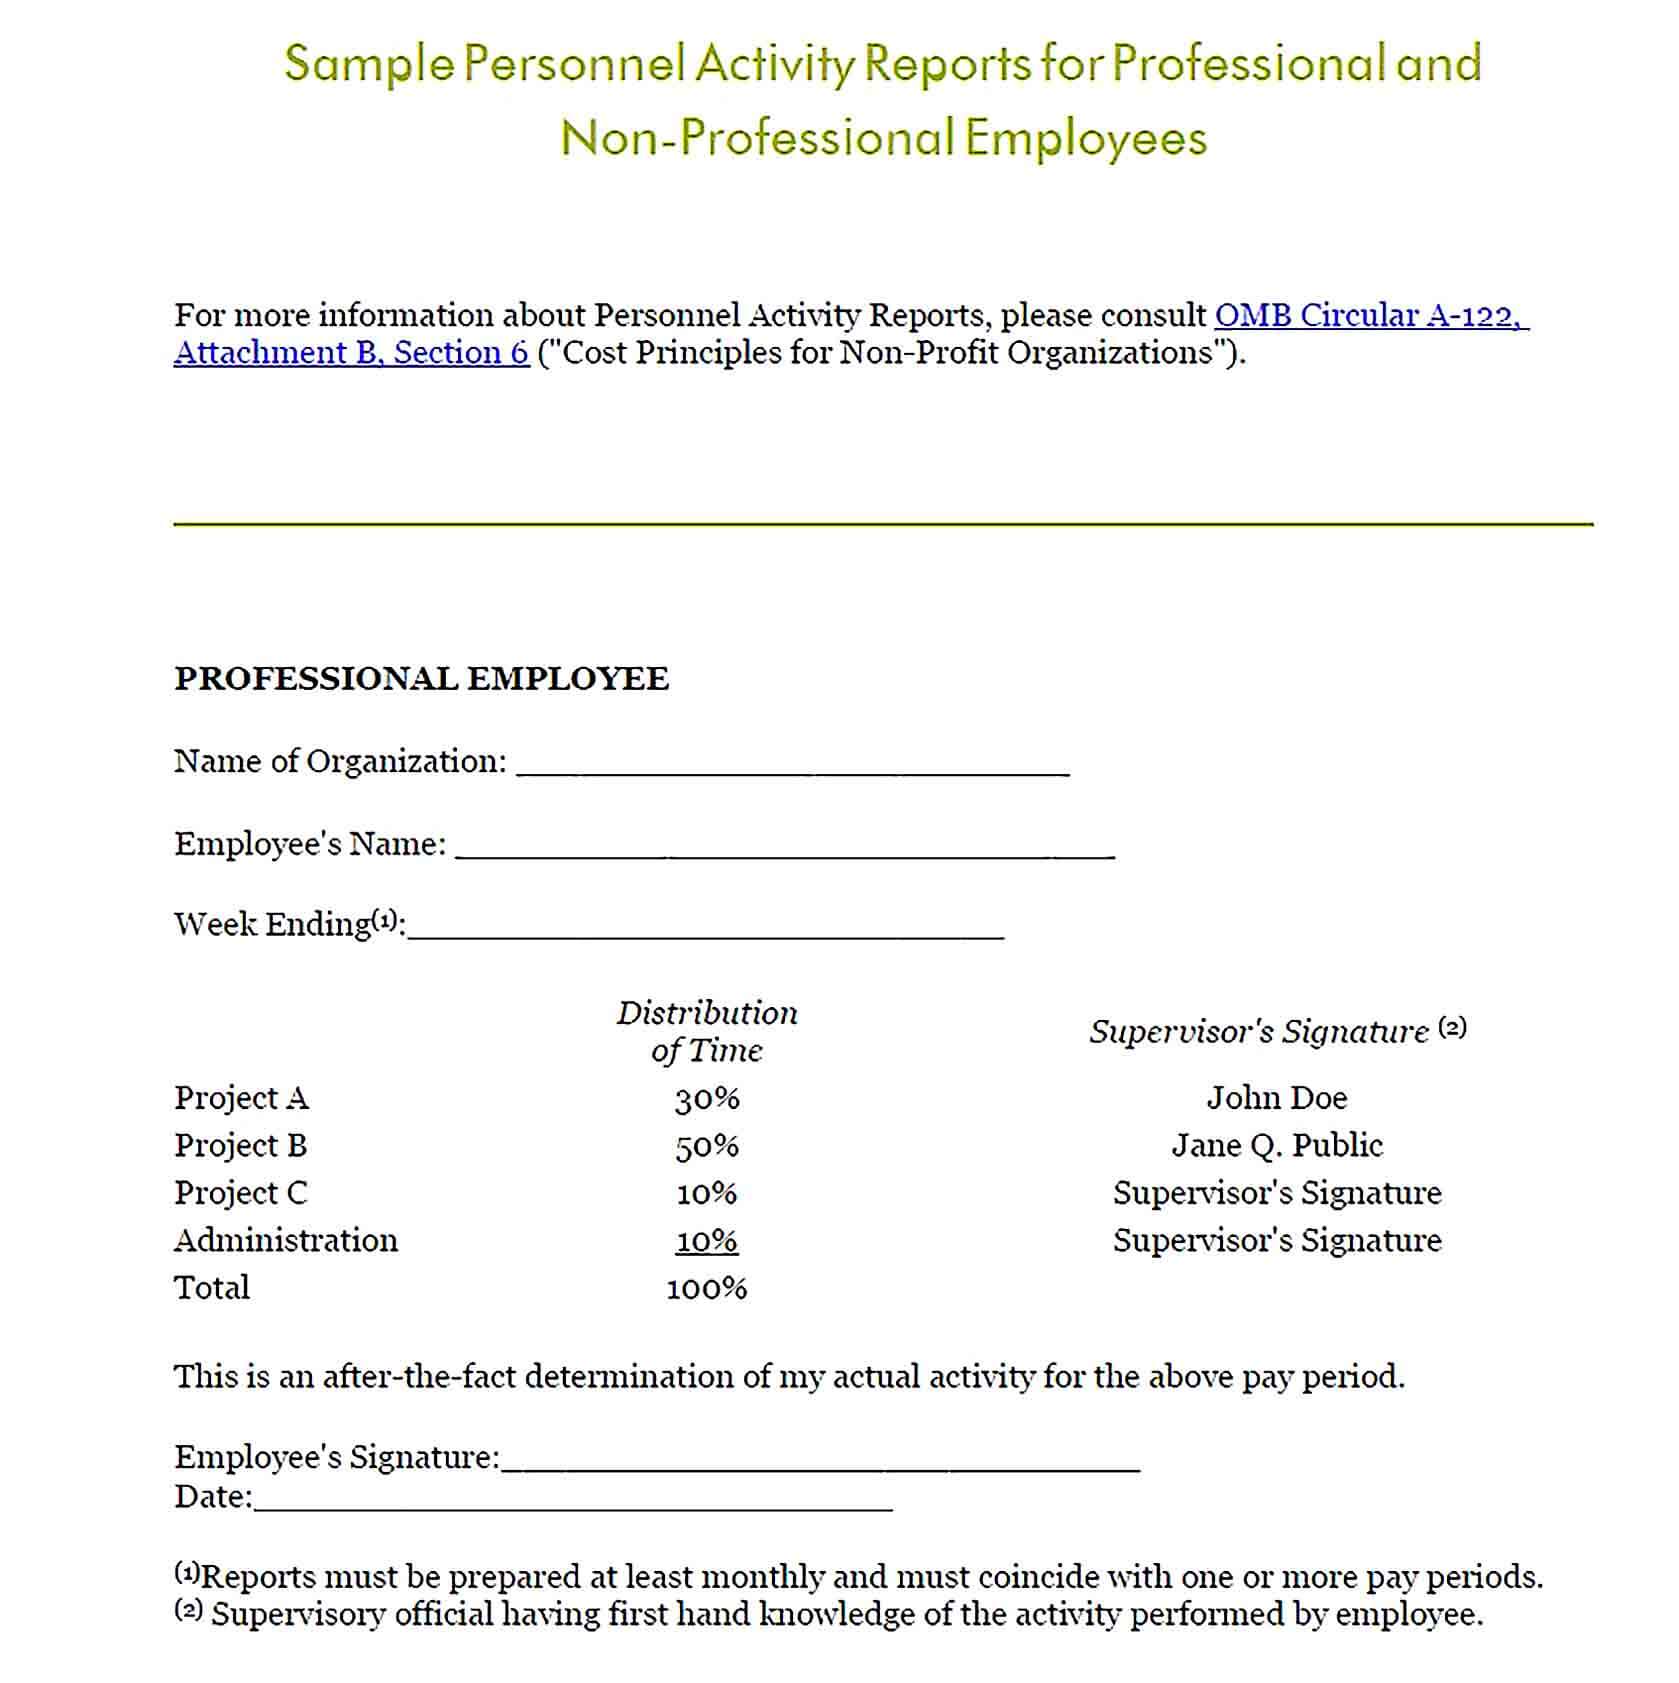 Sample Personnel Activity Report